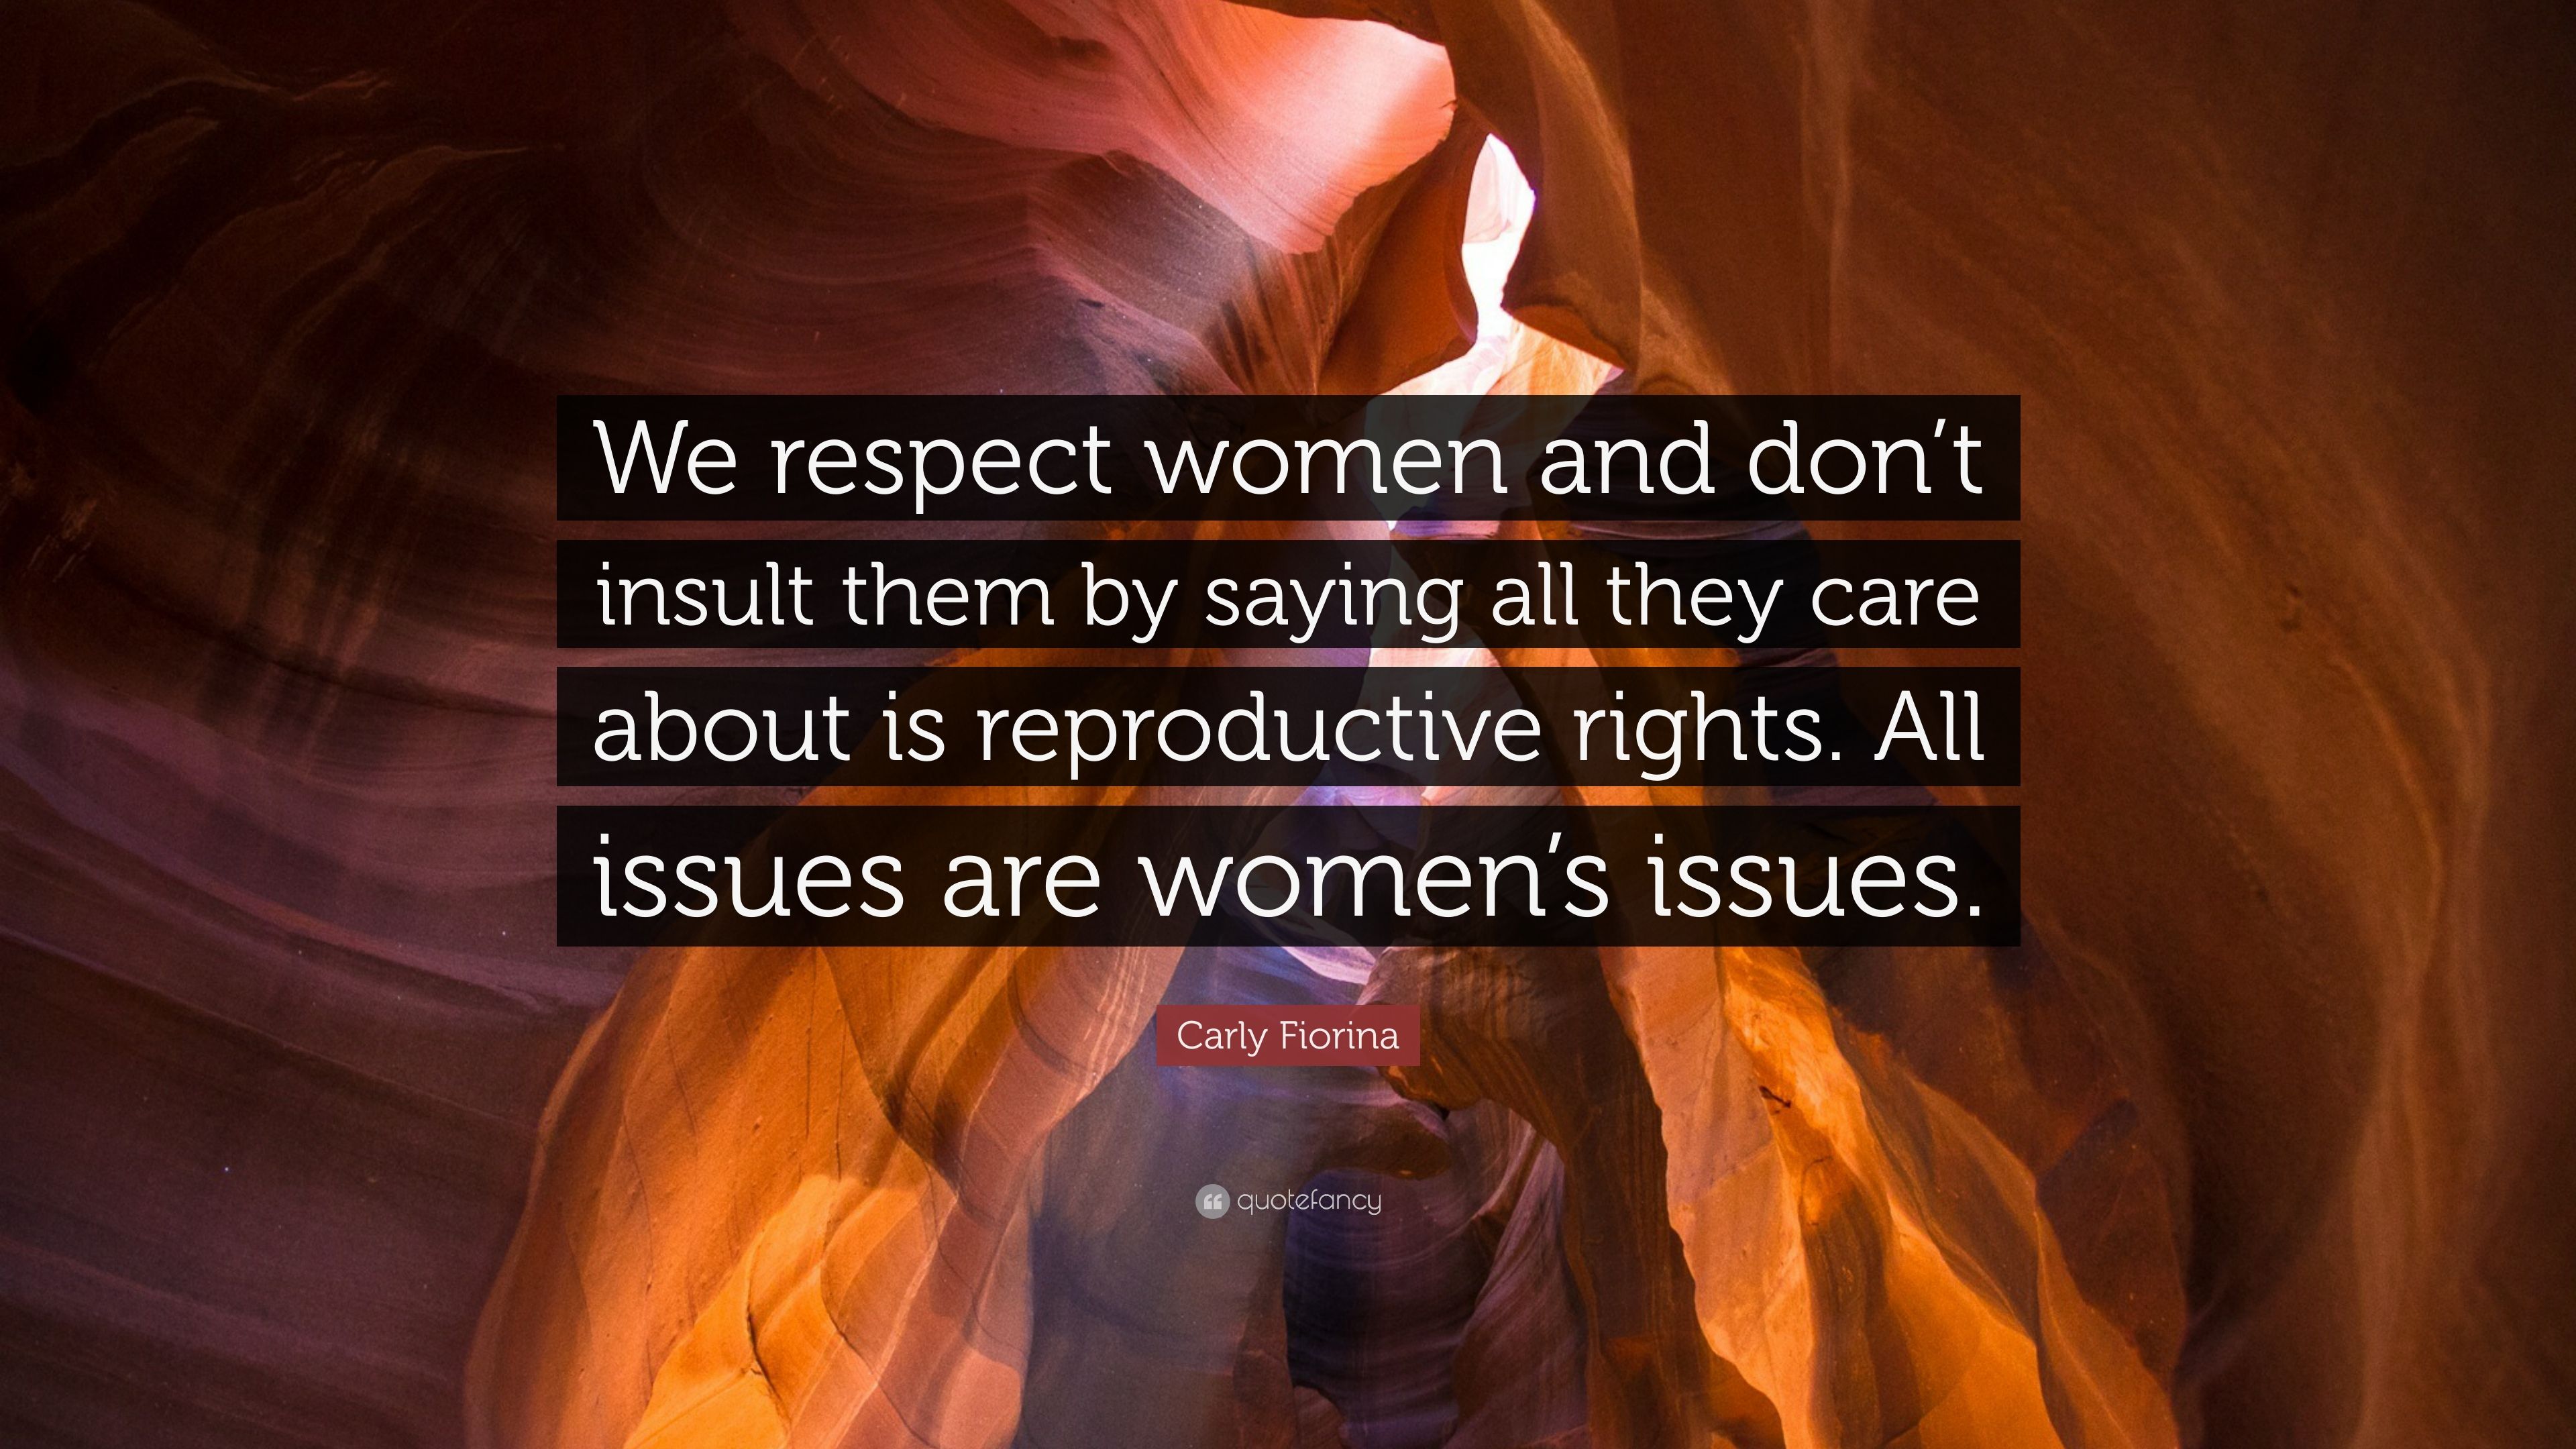 Carly Fiorina Quote: “We respect women and don't insult them